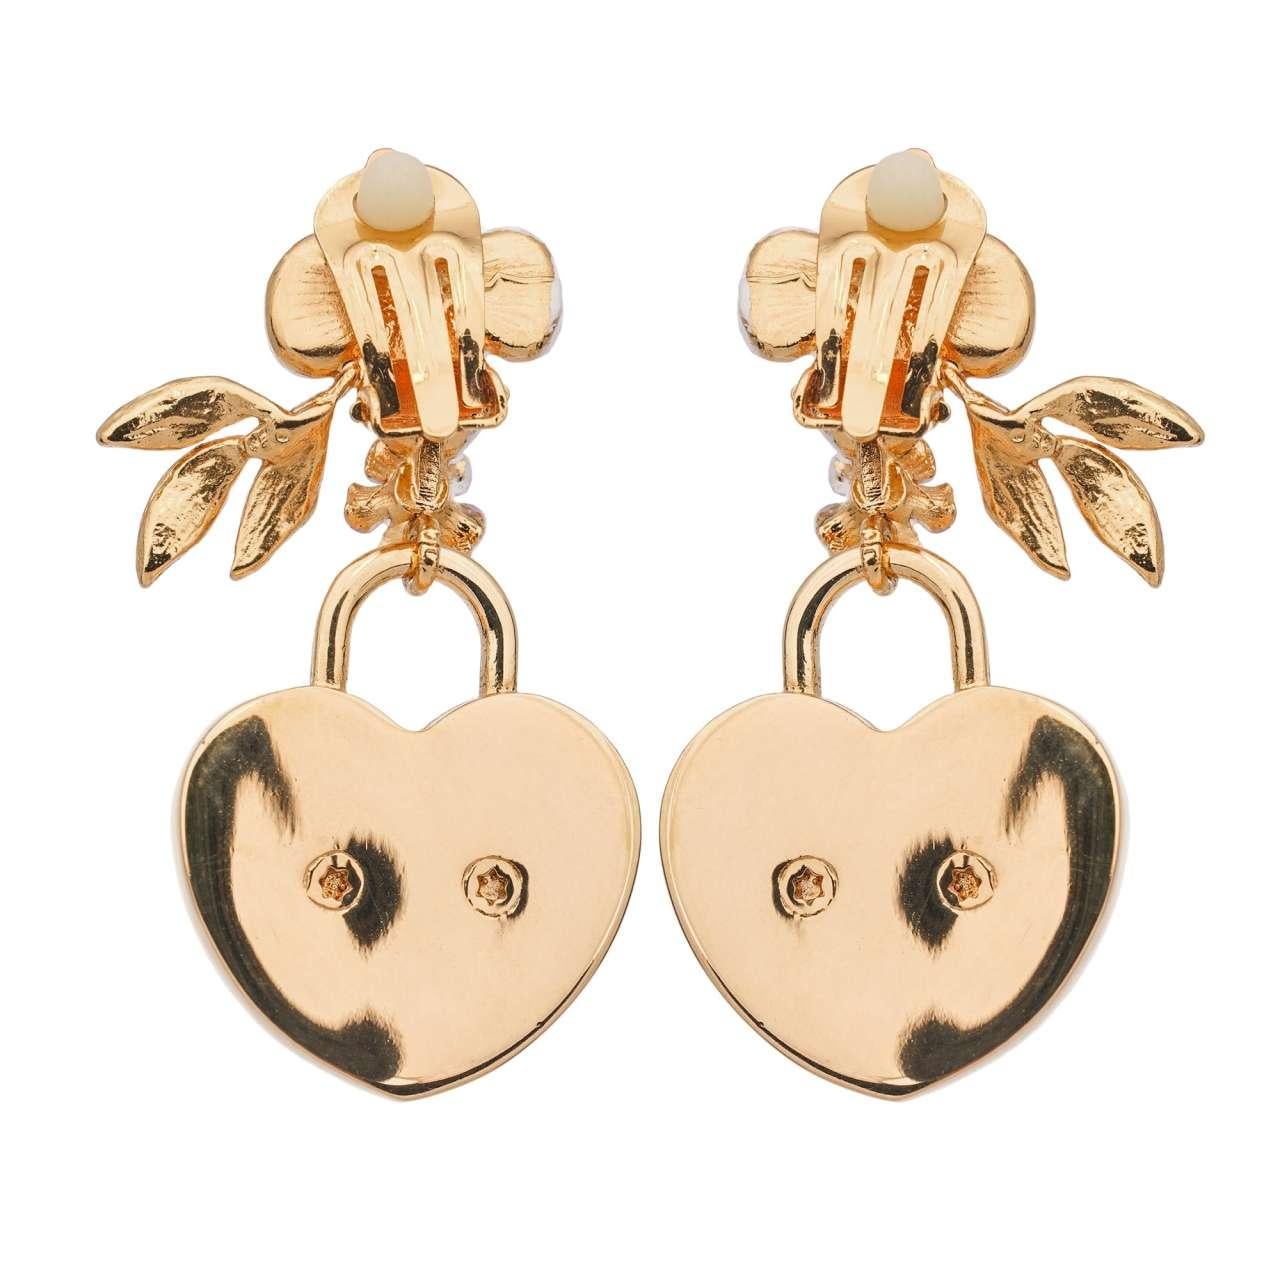 - Cherry flower Clip Earrings adorned with heart lockets in gold and pink by DOLCE & GABBANA - RUNWAY - Dolce & Gabbana Fashion Show - New with Box - Made in Italy - Gold-plated brass - Clip fastening - Nickel free - Model: WEK2X4-W1111-ZOO00 -